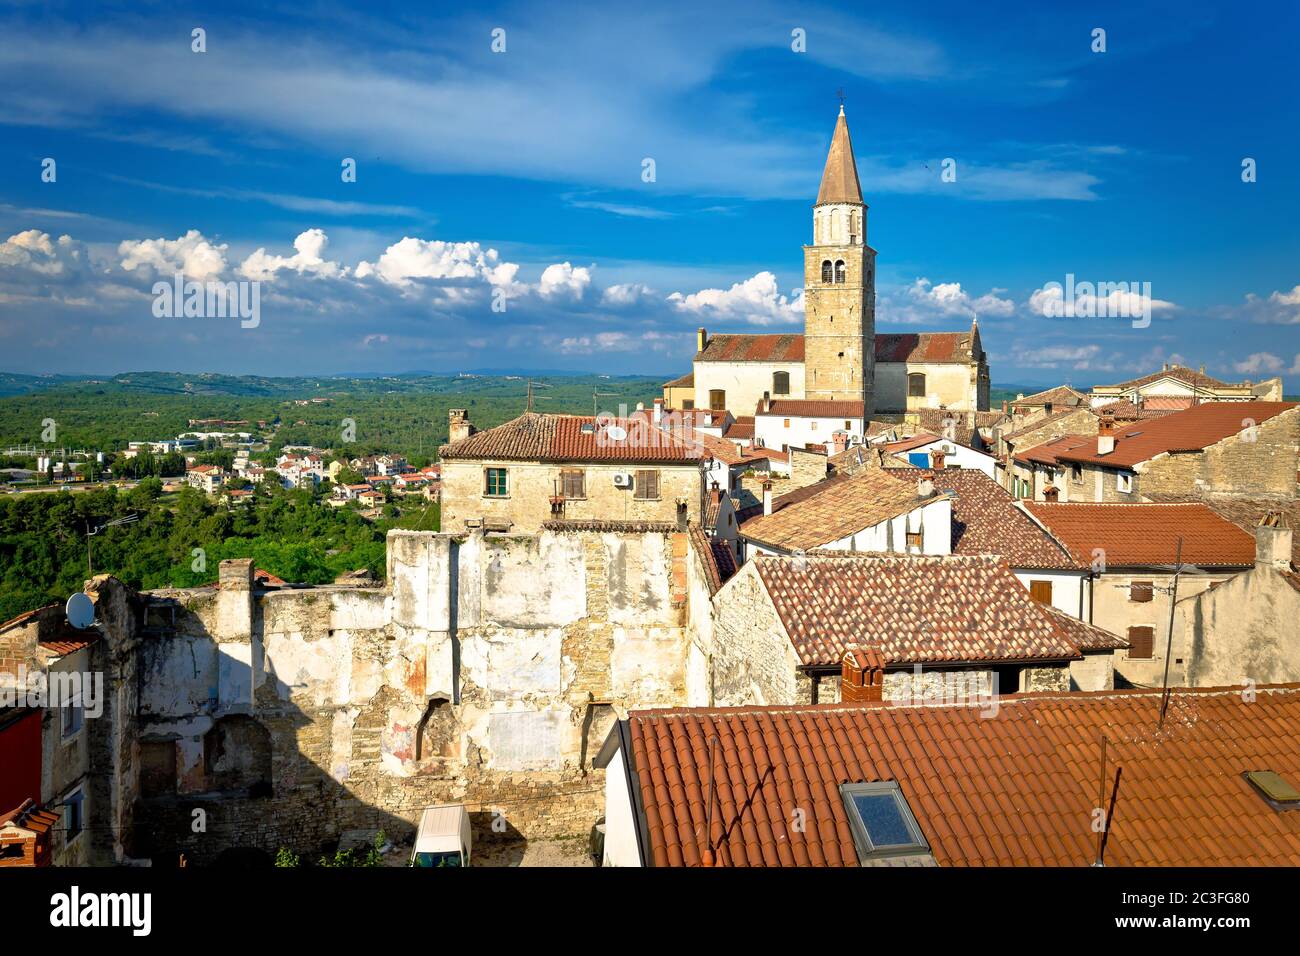 Old stone town of Buje tower and rooftops view Stock Photo